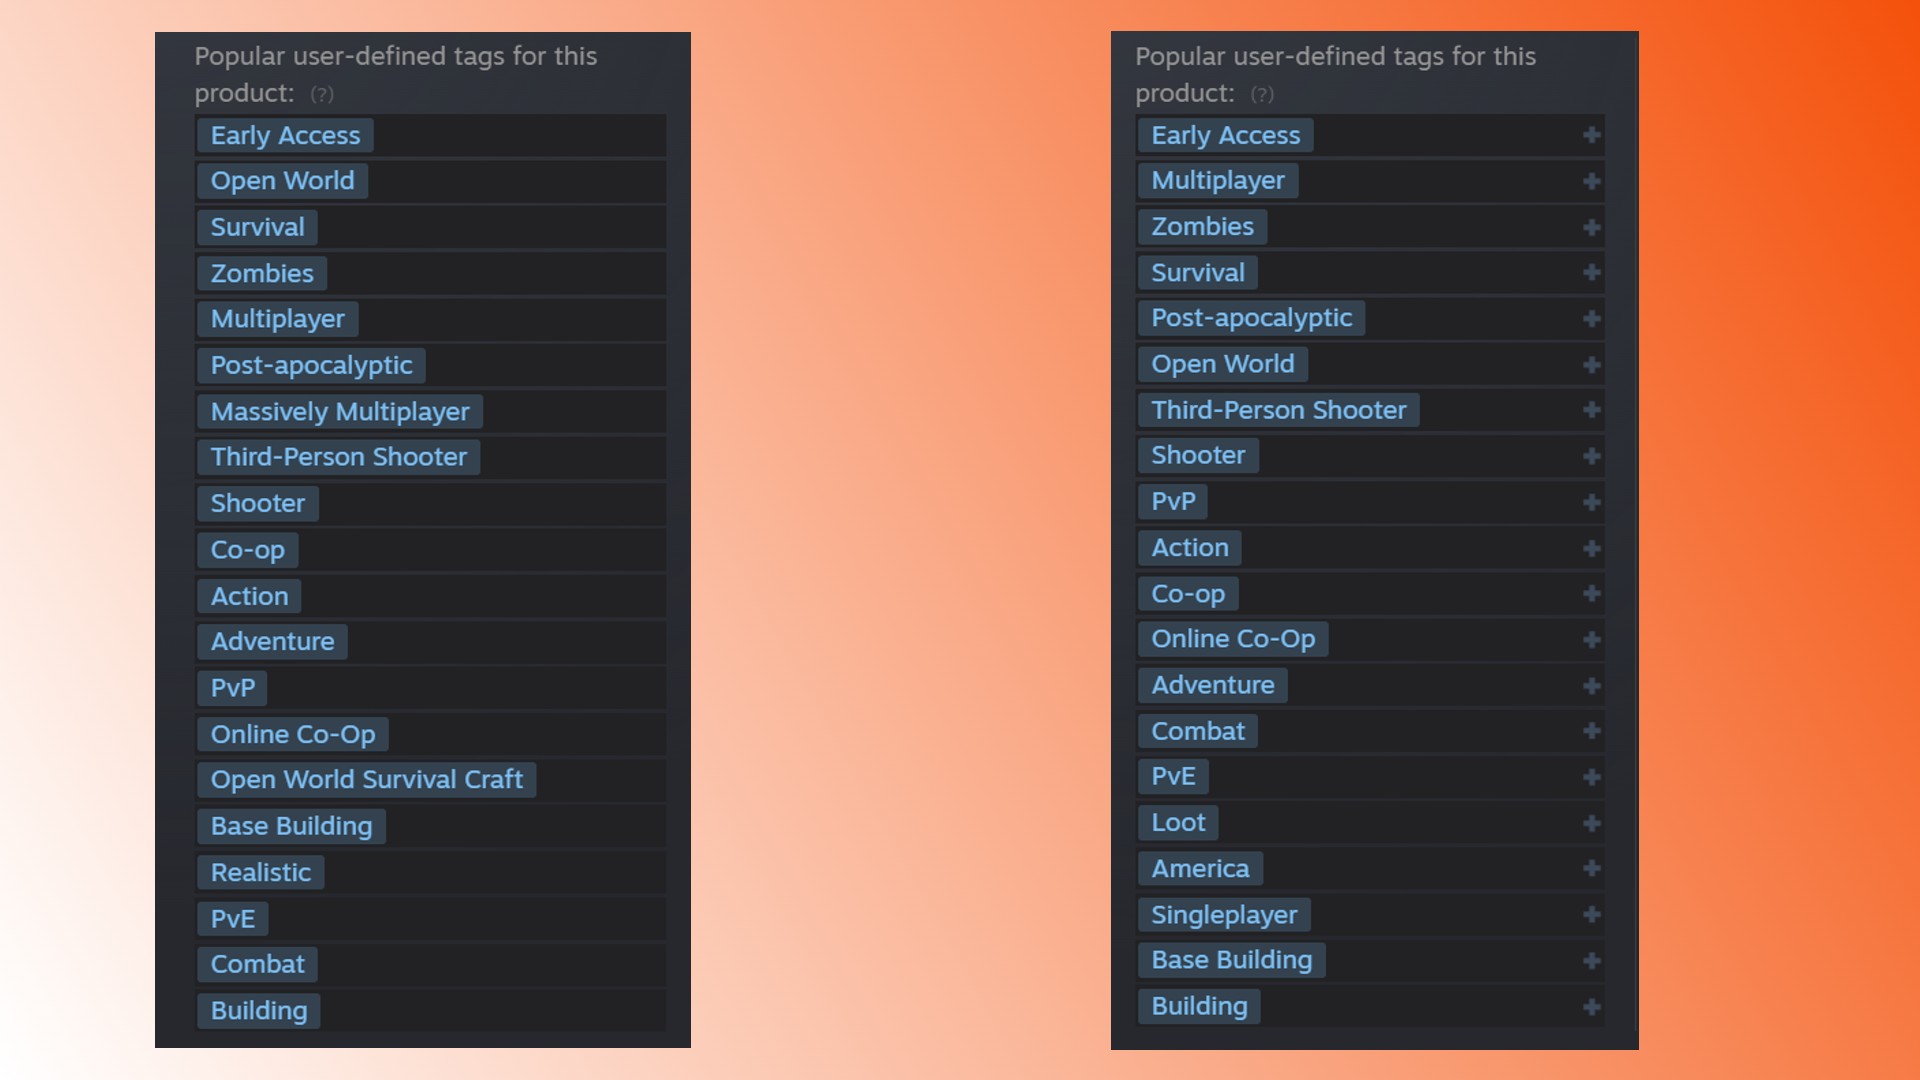 The Day Before Steam tags: A comparison of The Day Before Steam page before and after launch